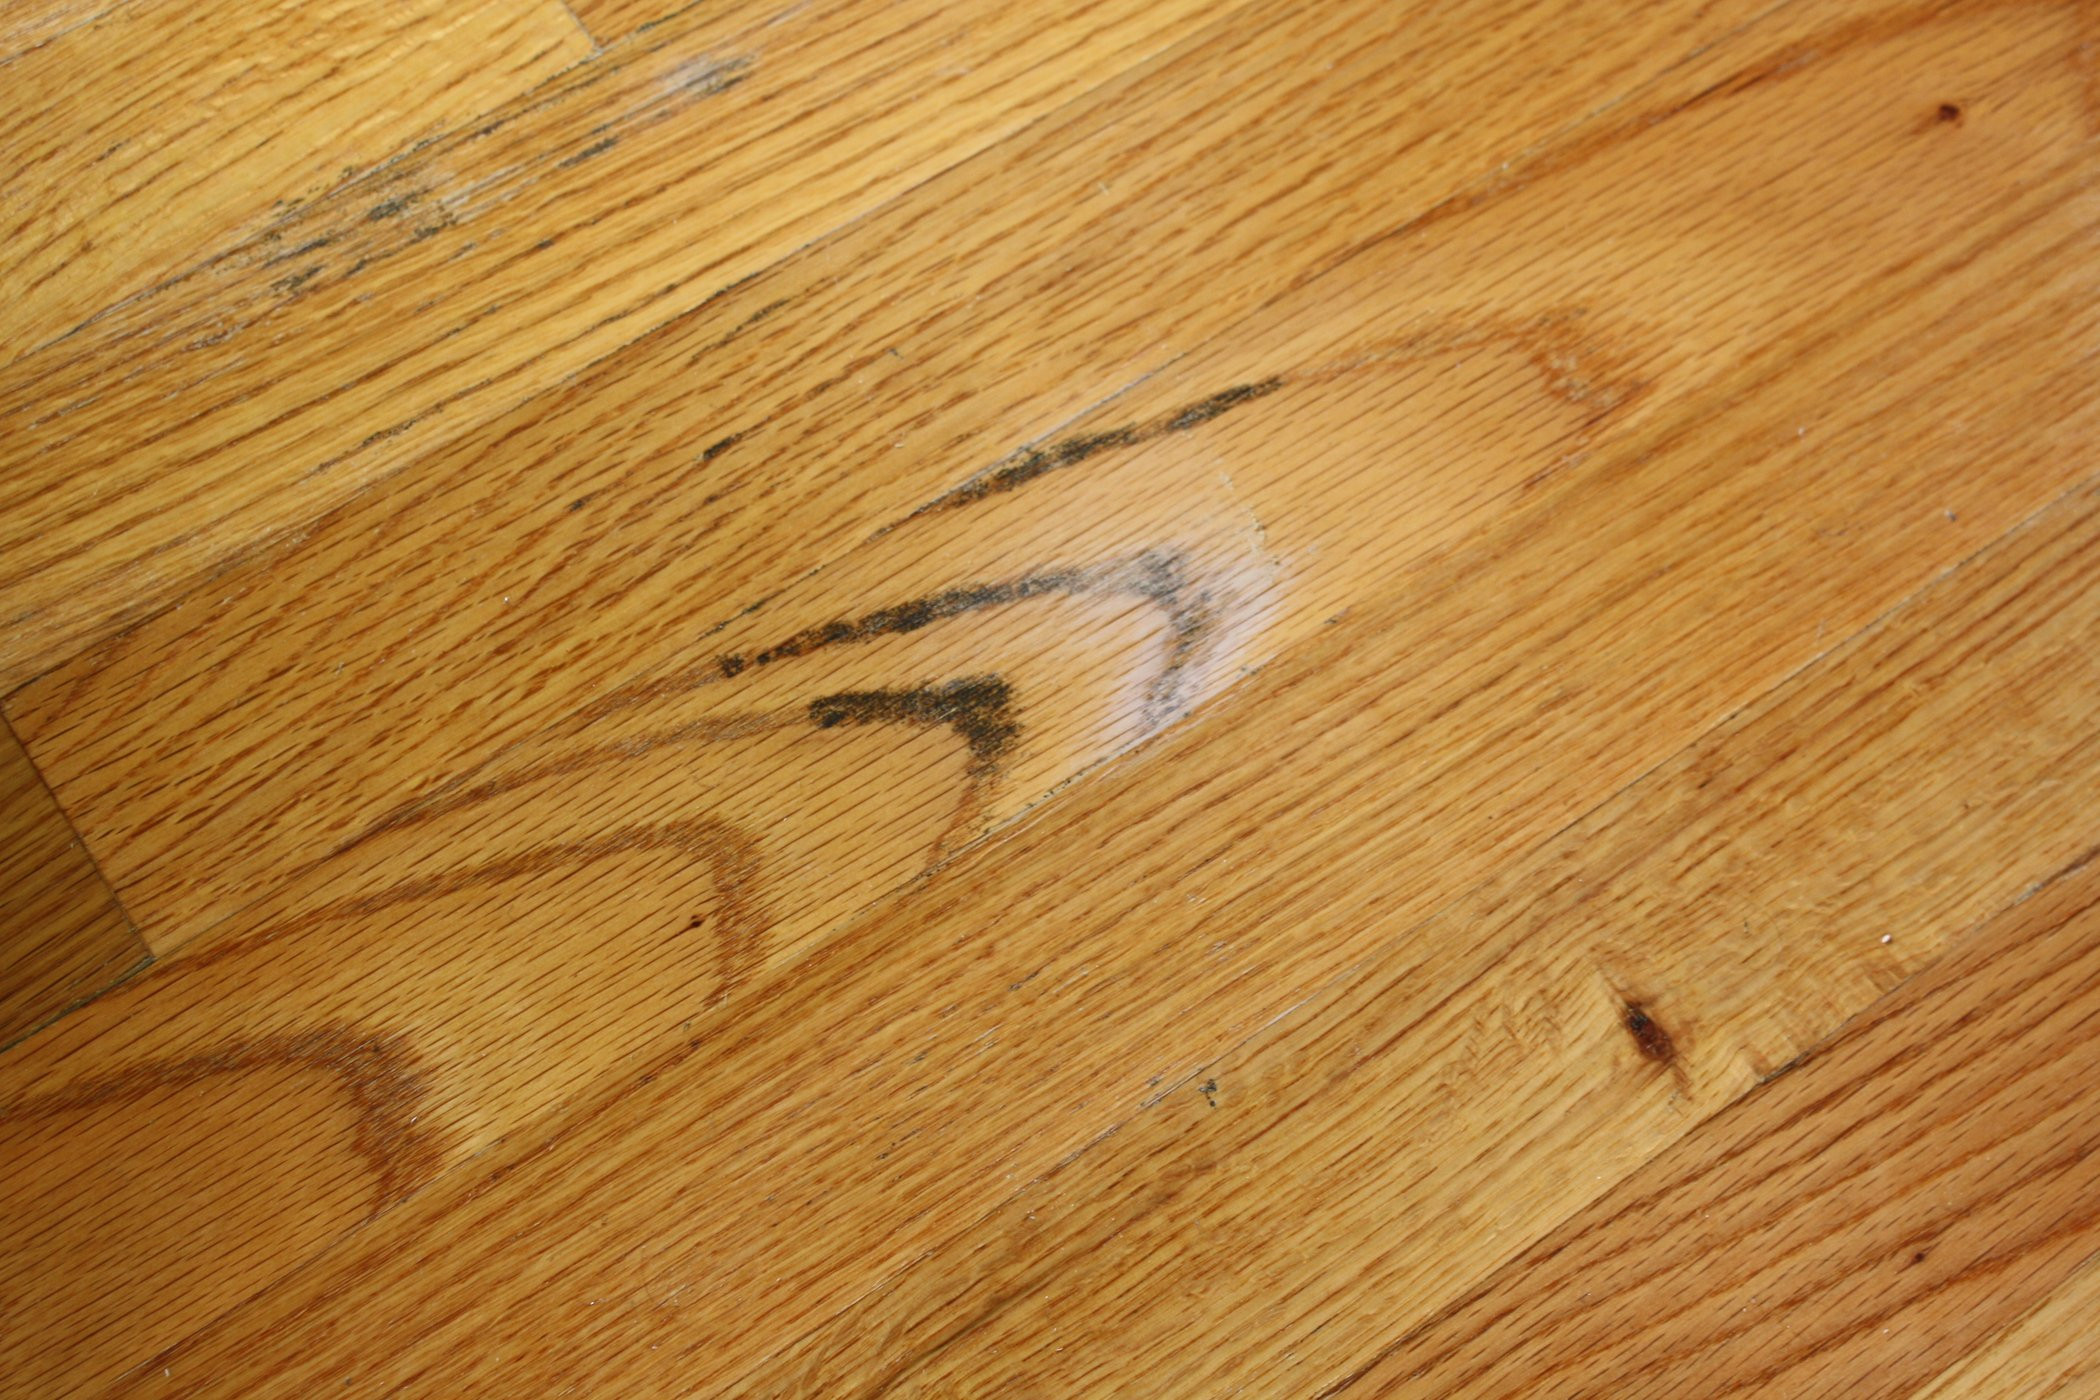 hardwood floor refinishing contractors near me of how to clean mold from a wood floor 4 steps inside fylcmqyg7dyp6ds